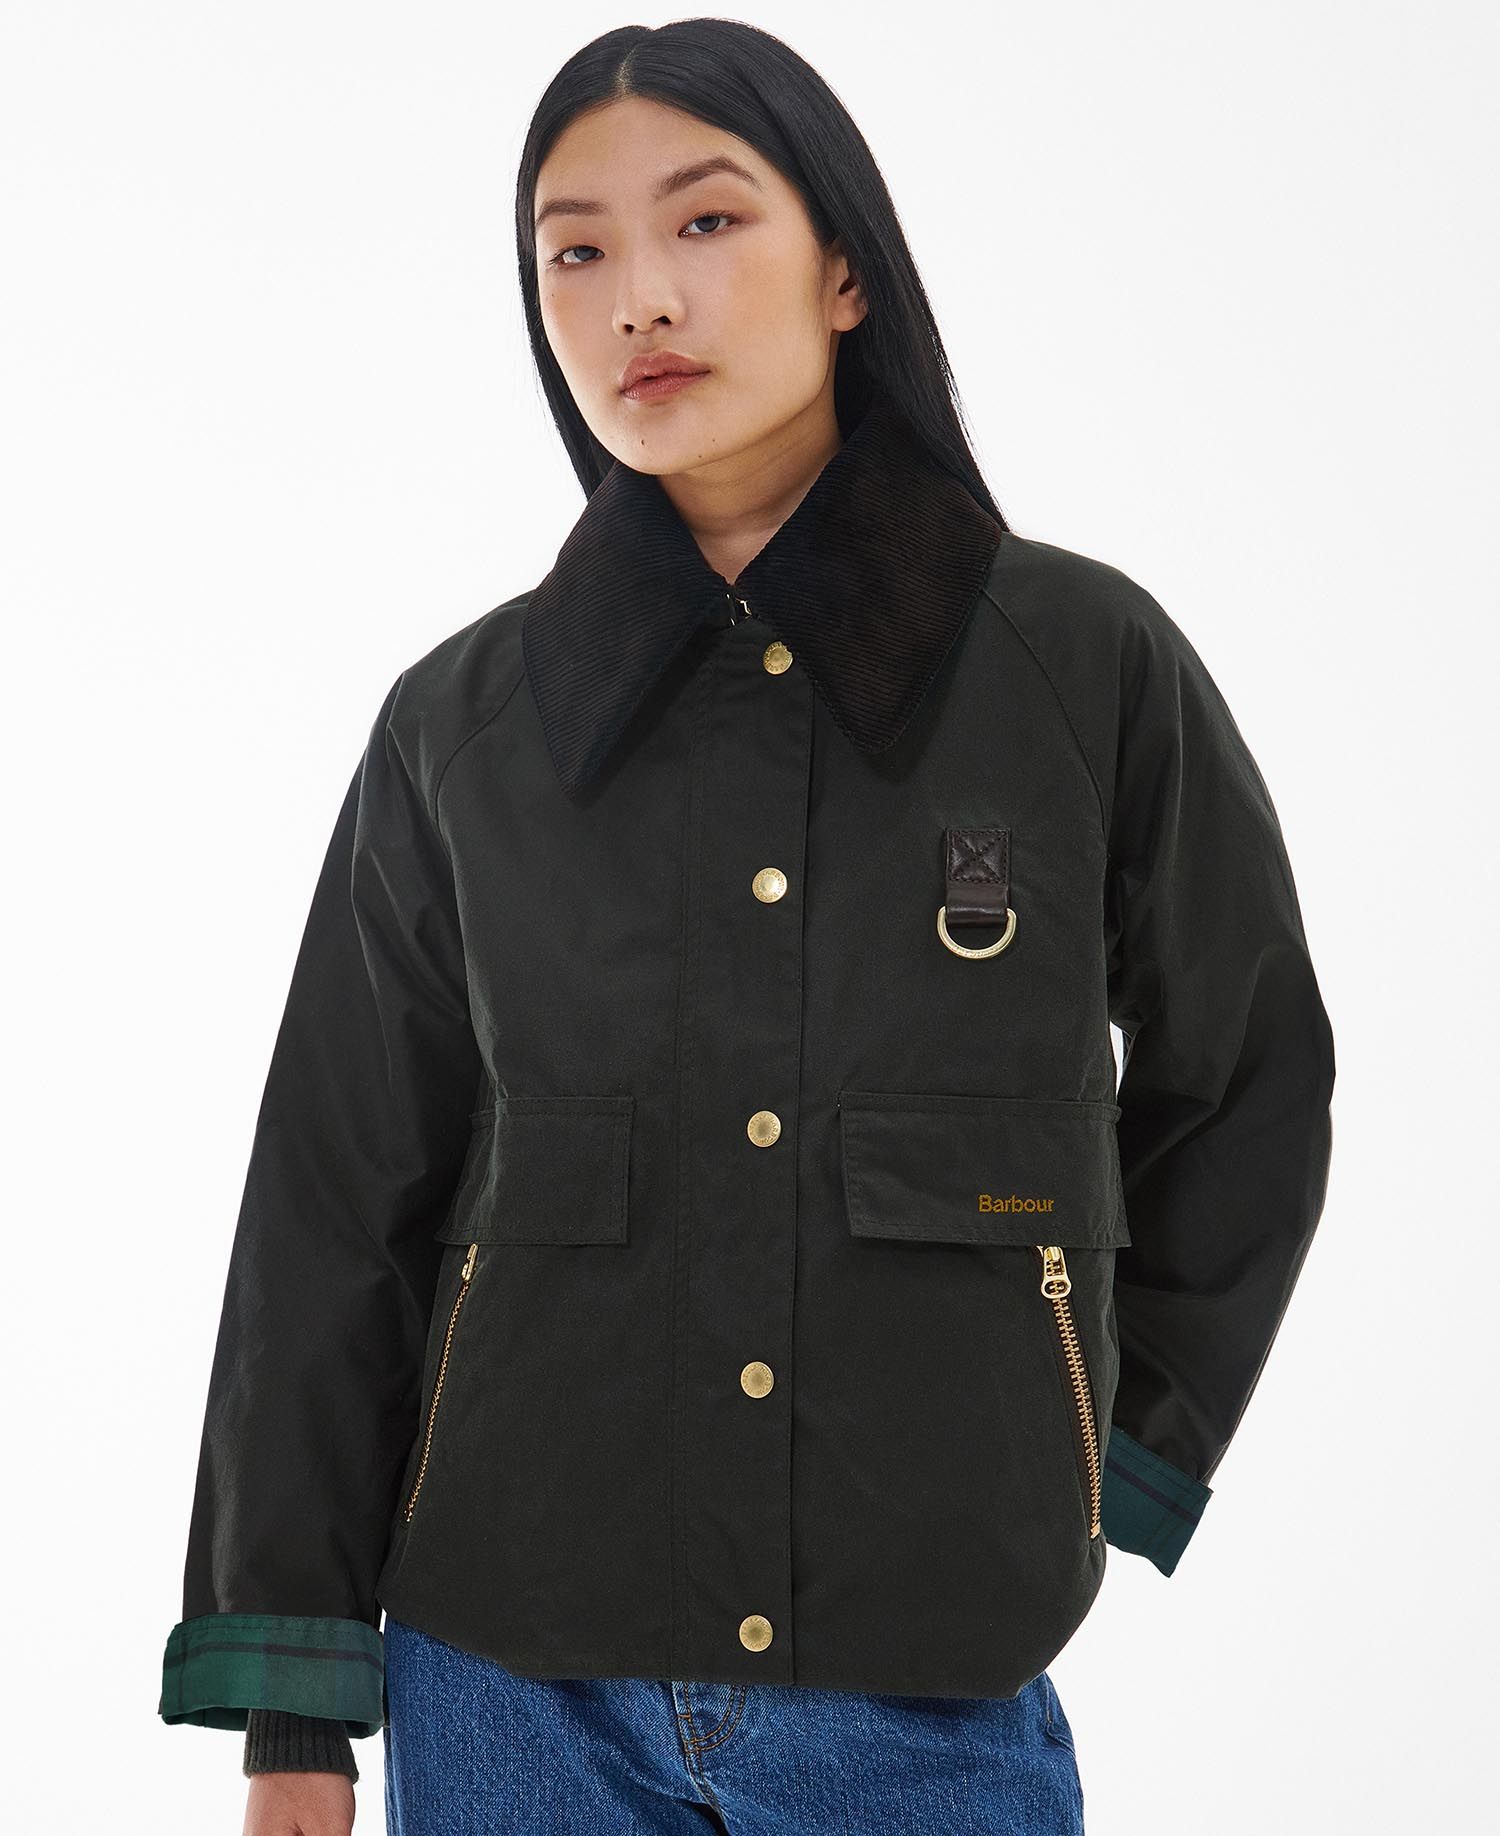 Shop the Barbour Catton Wax Jacket in Black today. | Barbour